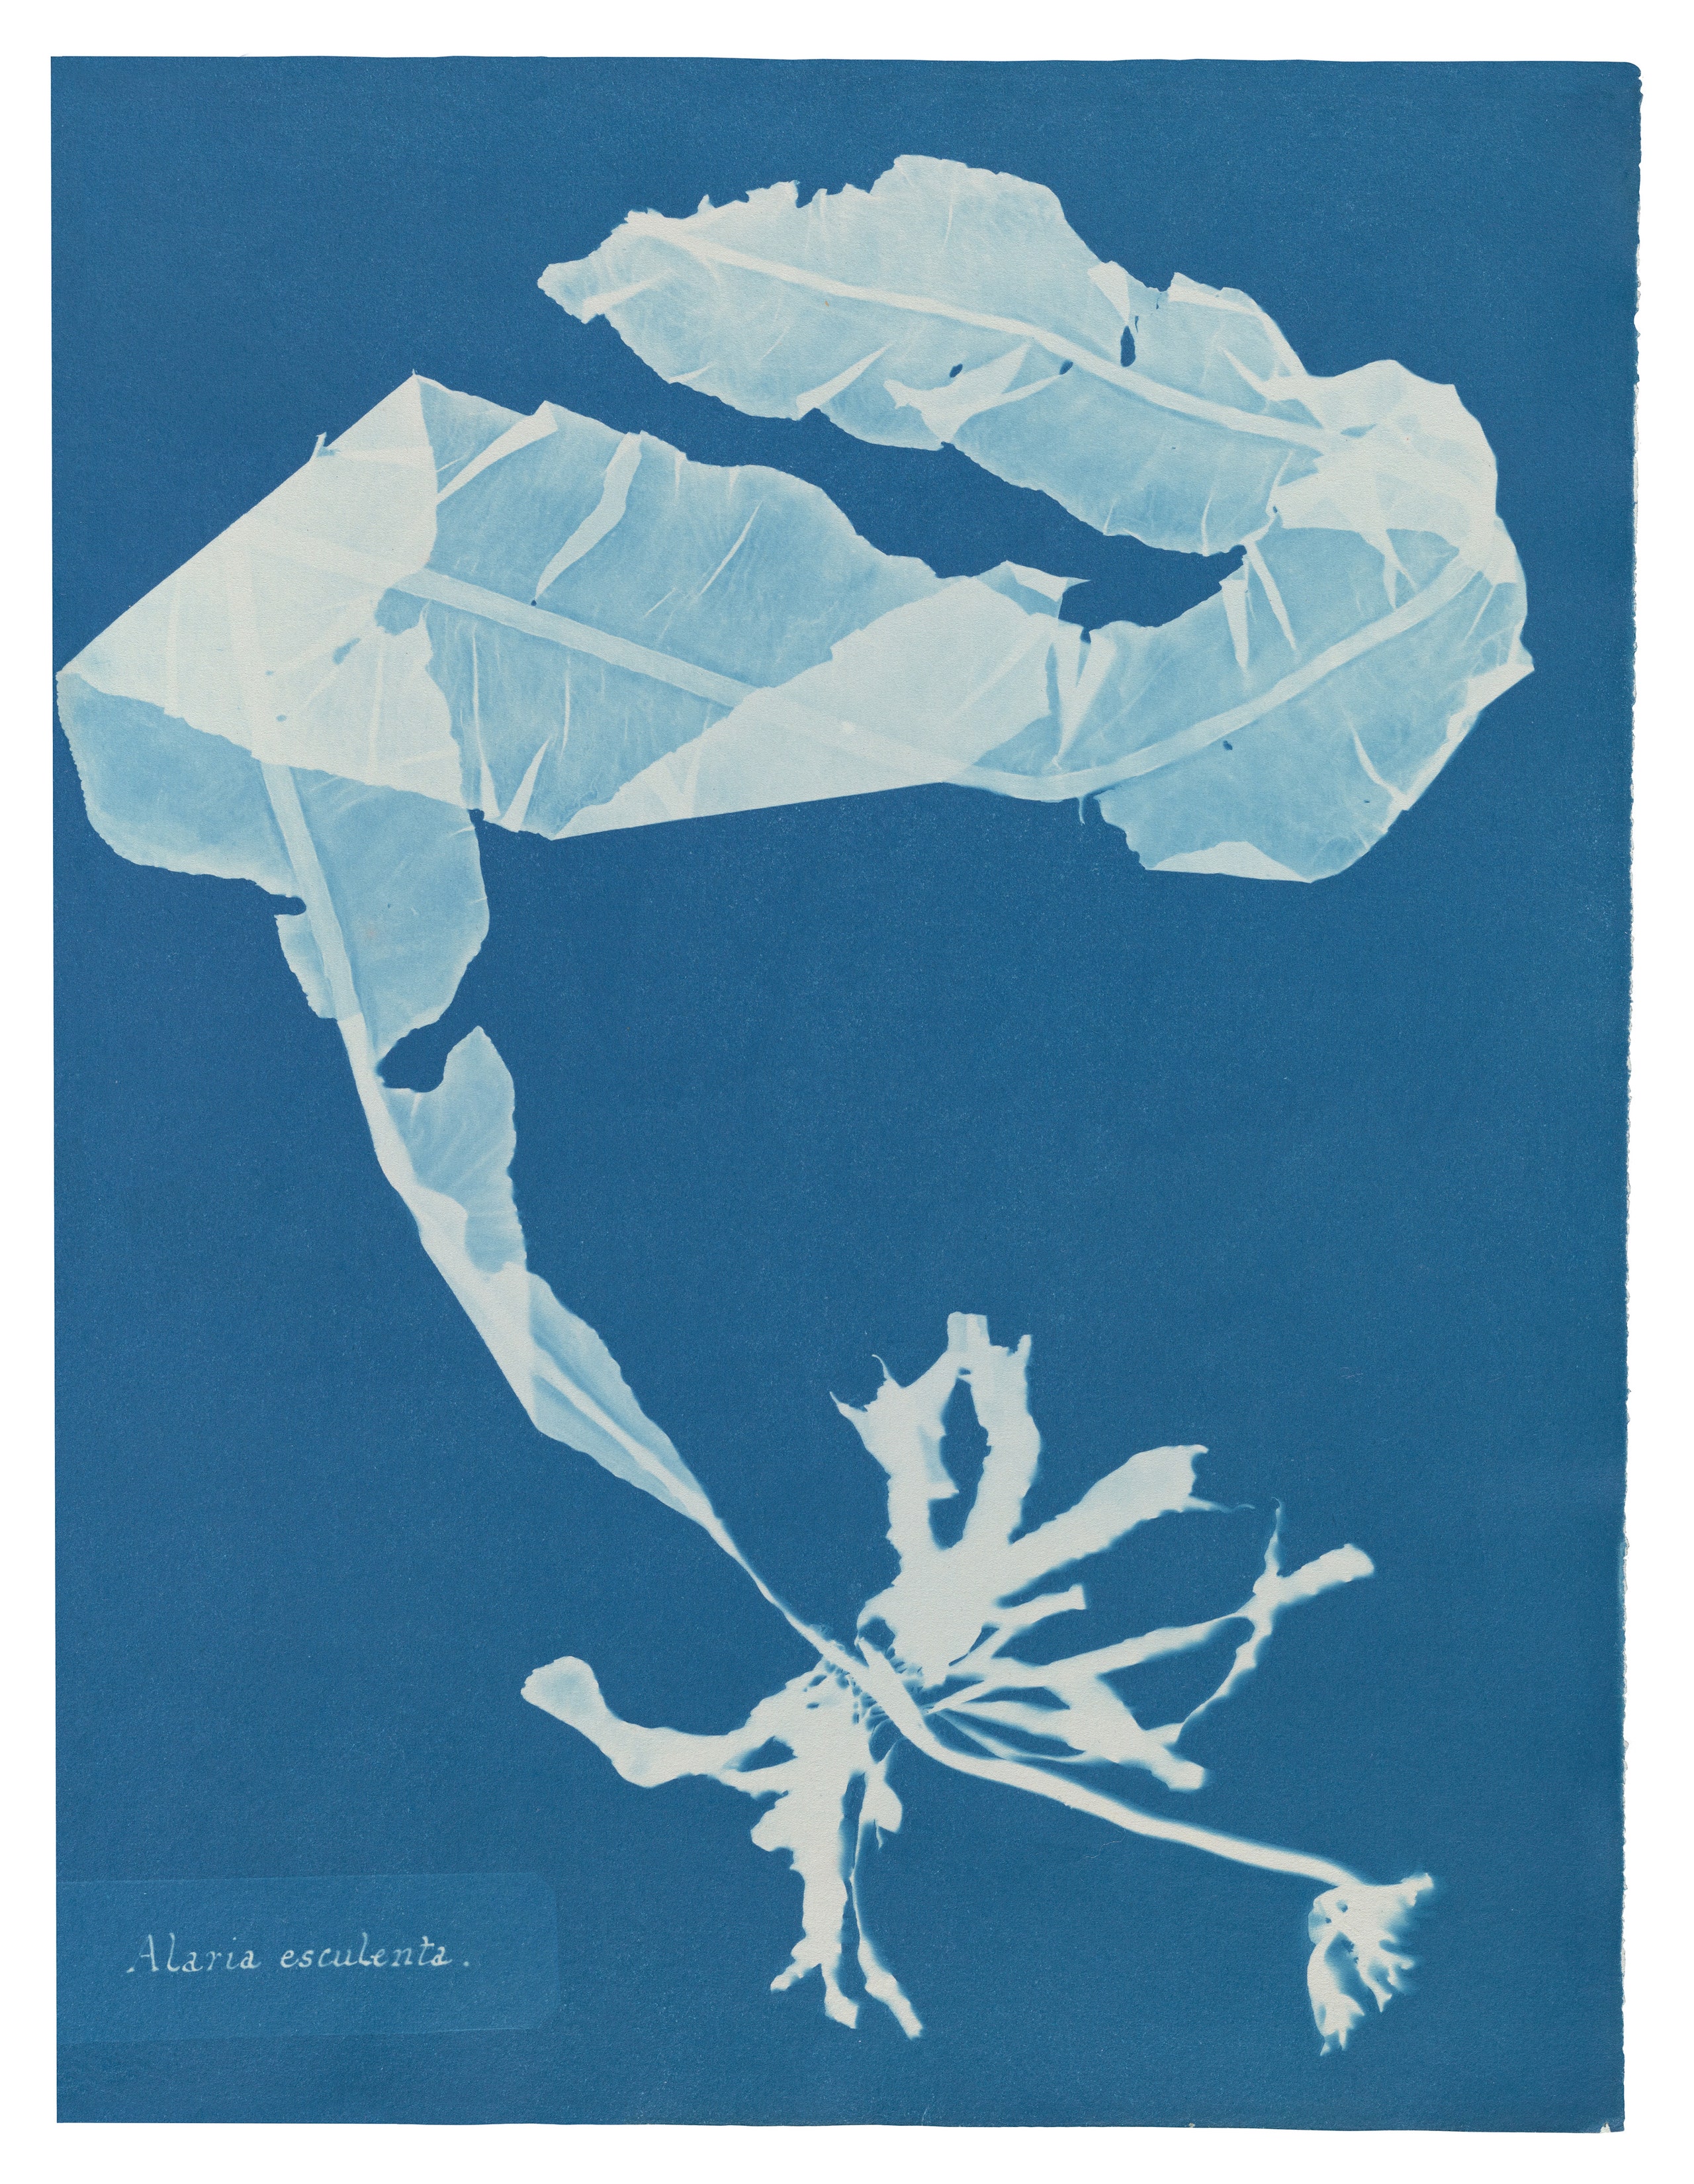 Anna Atkins book captures the delicacy of algae and ferns